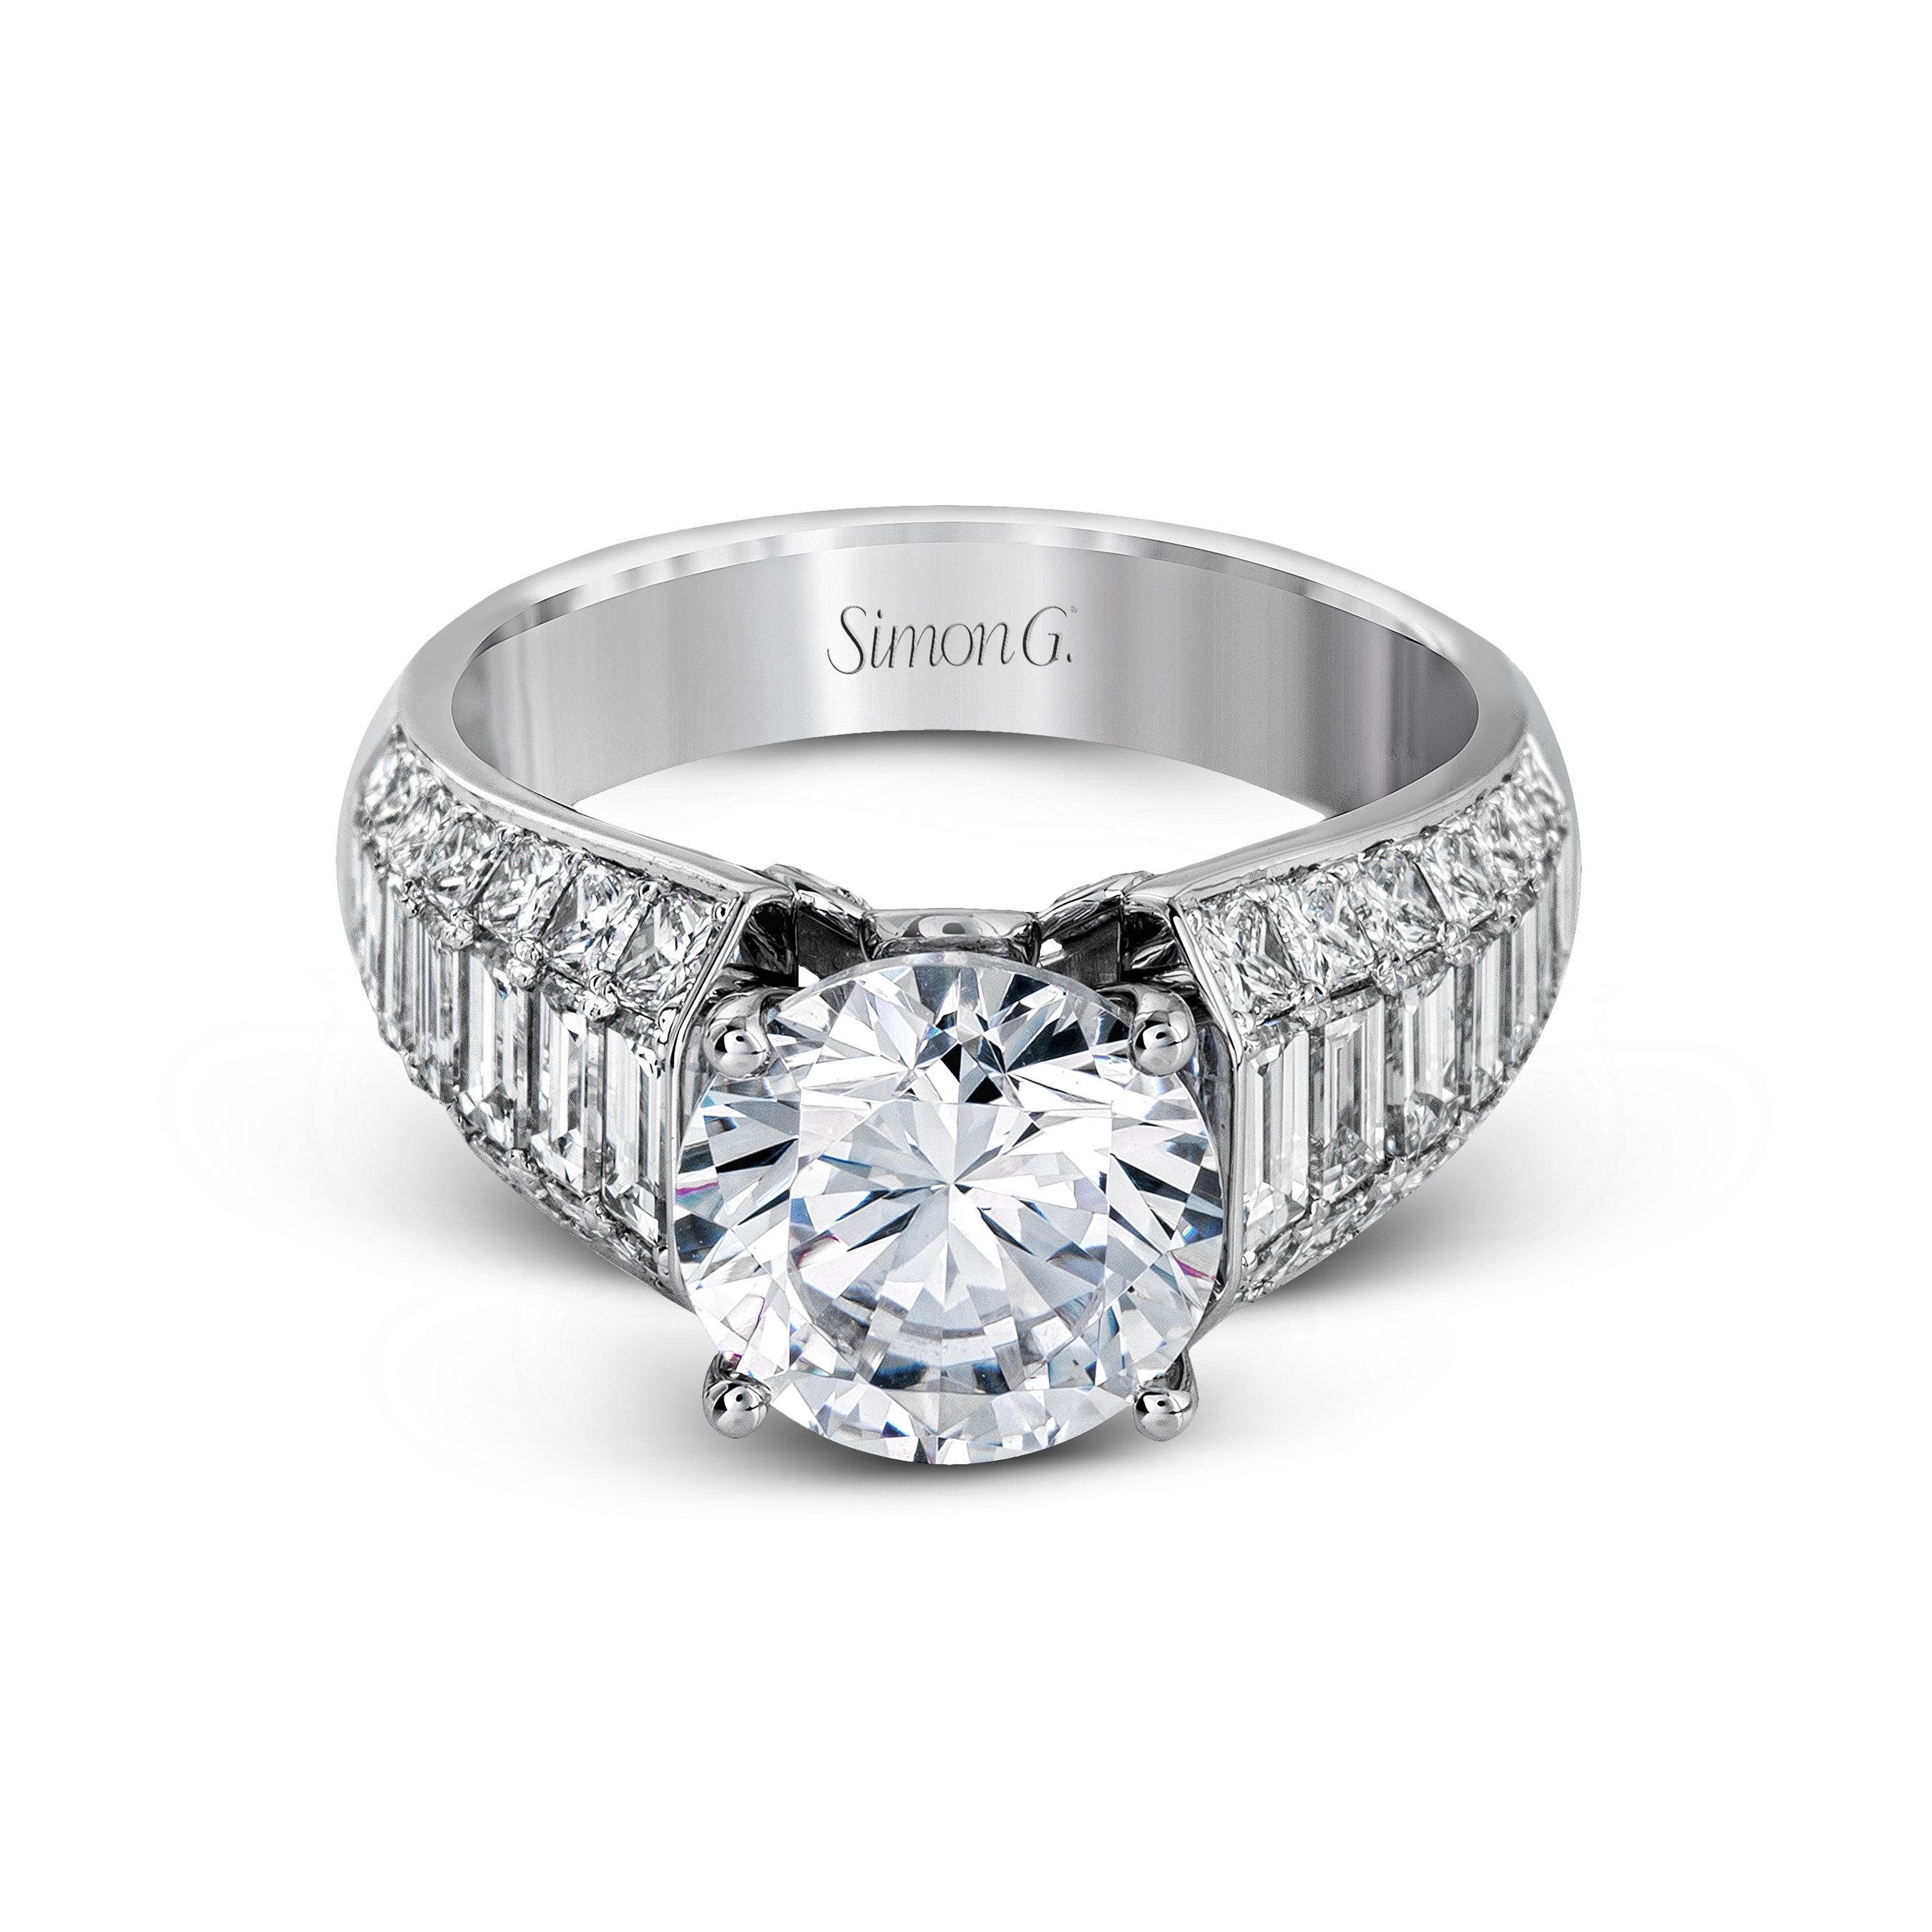 MR2534 Nocturnal Sophistication Collection White Gold Round Cut Engagement Ring